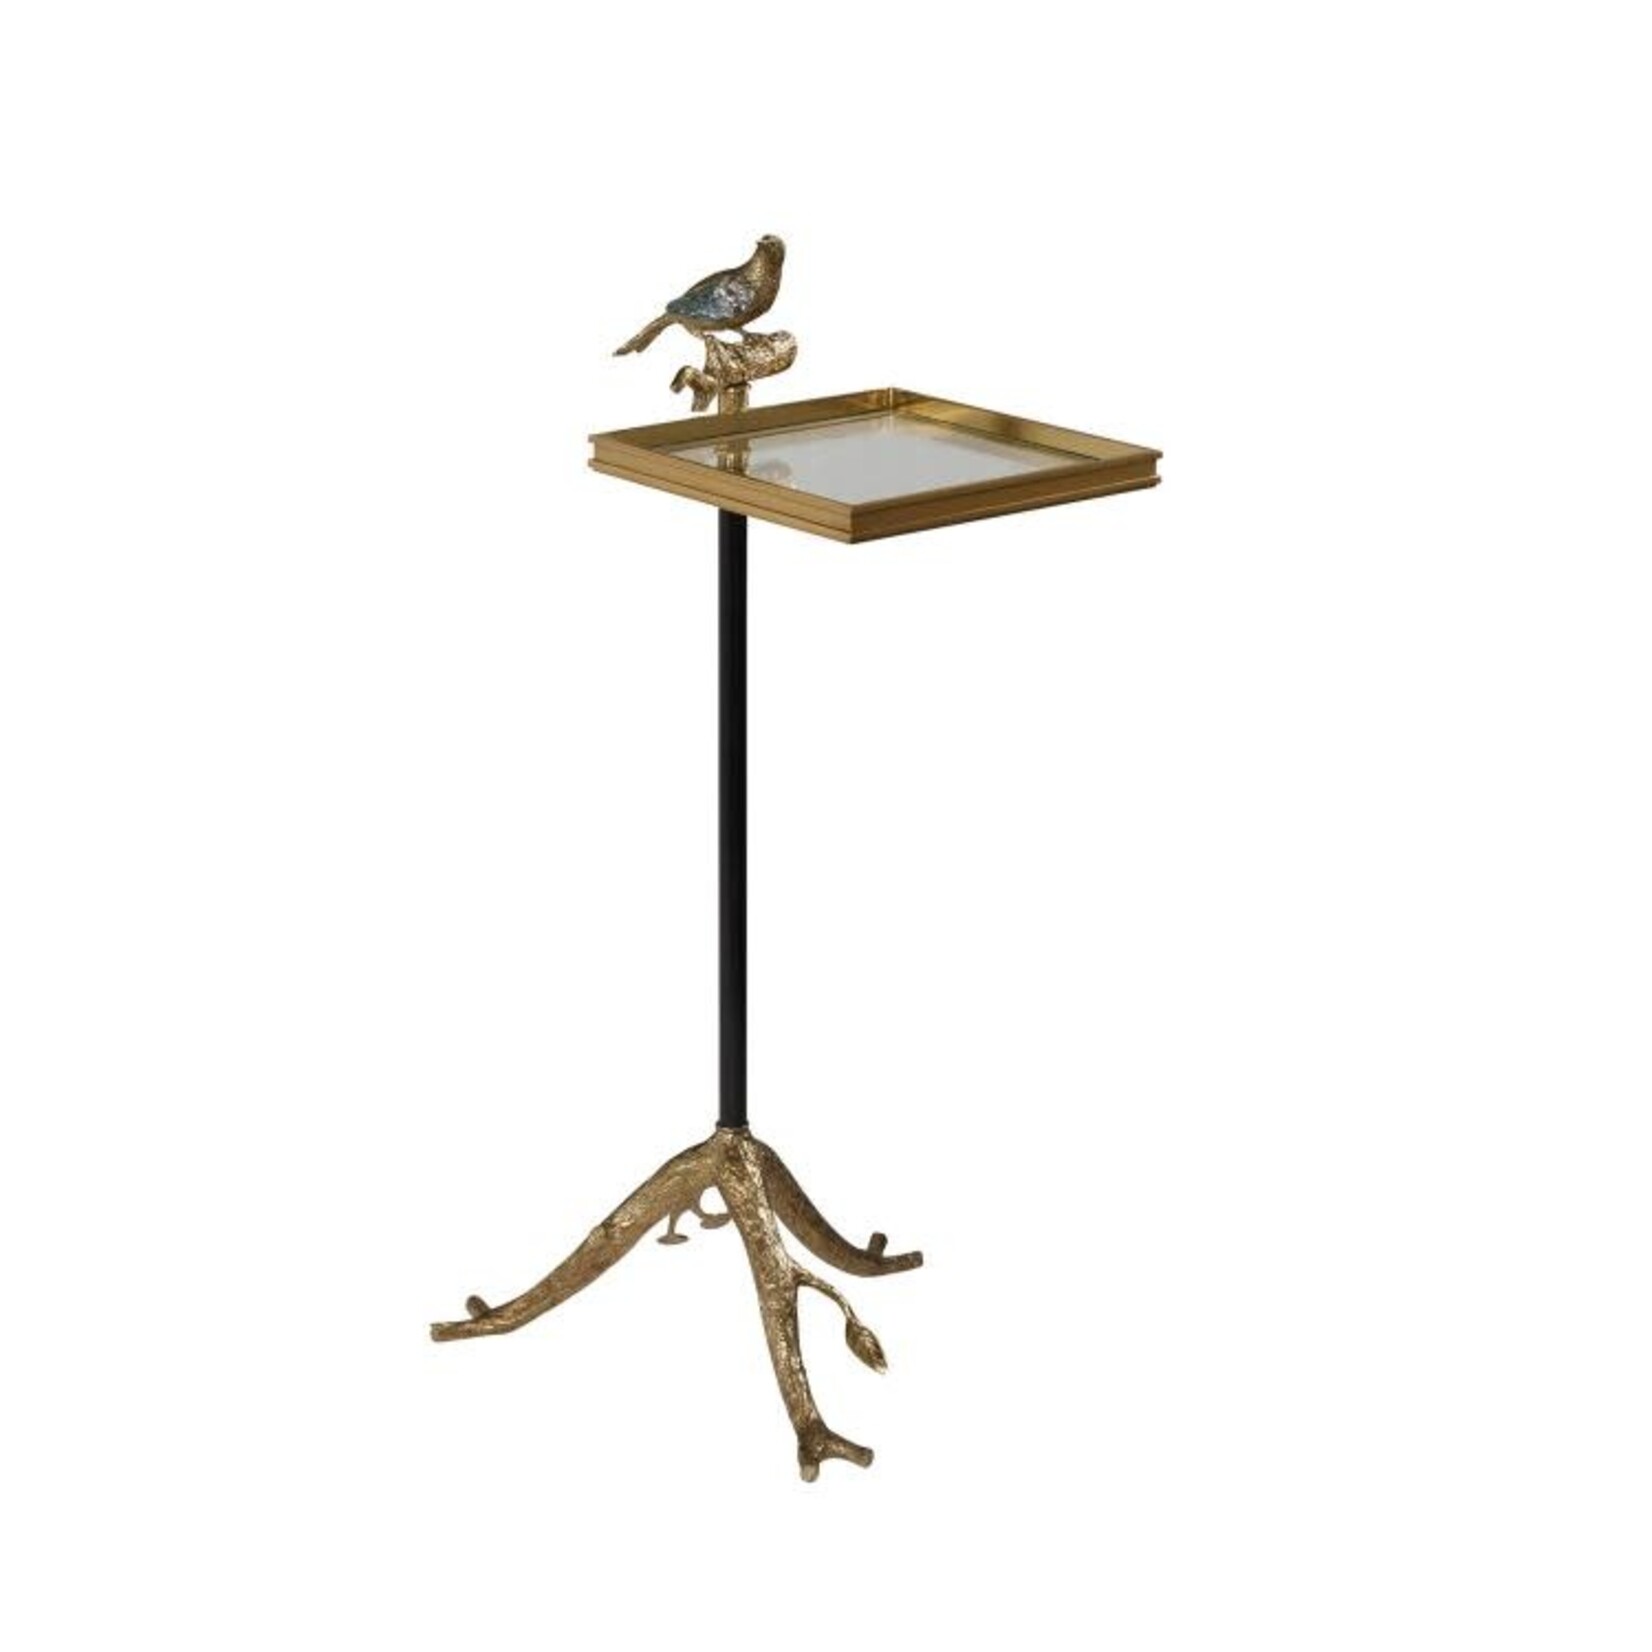 Maitland Smith Tweet Accent Brass & Iron Table with Paua Shell Inlay